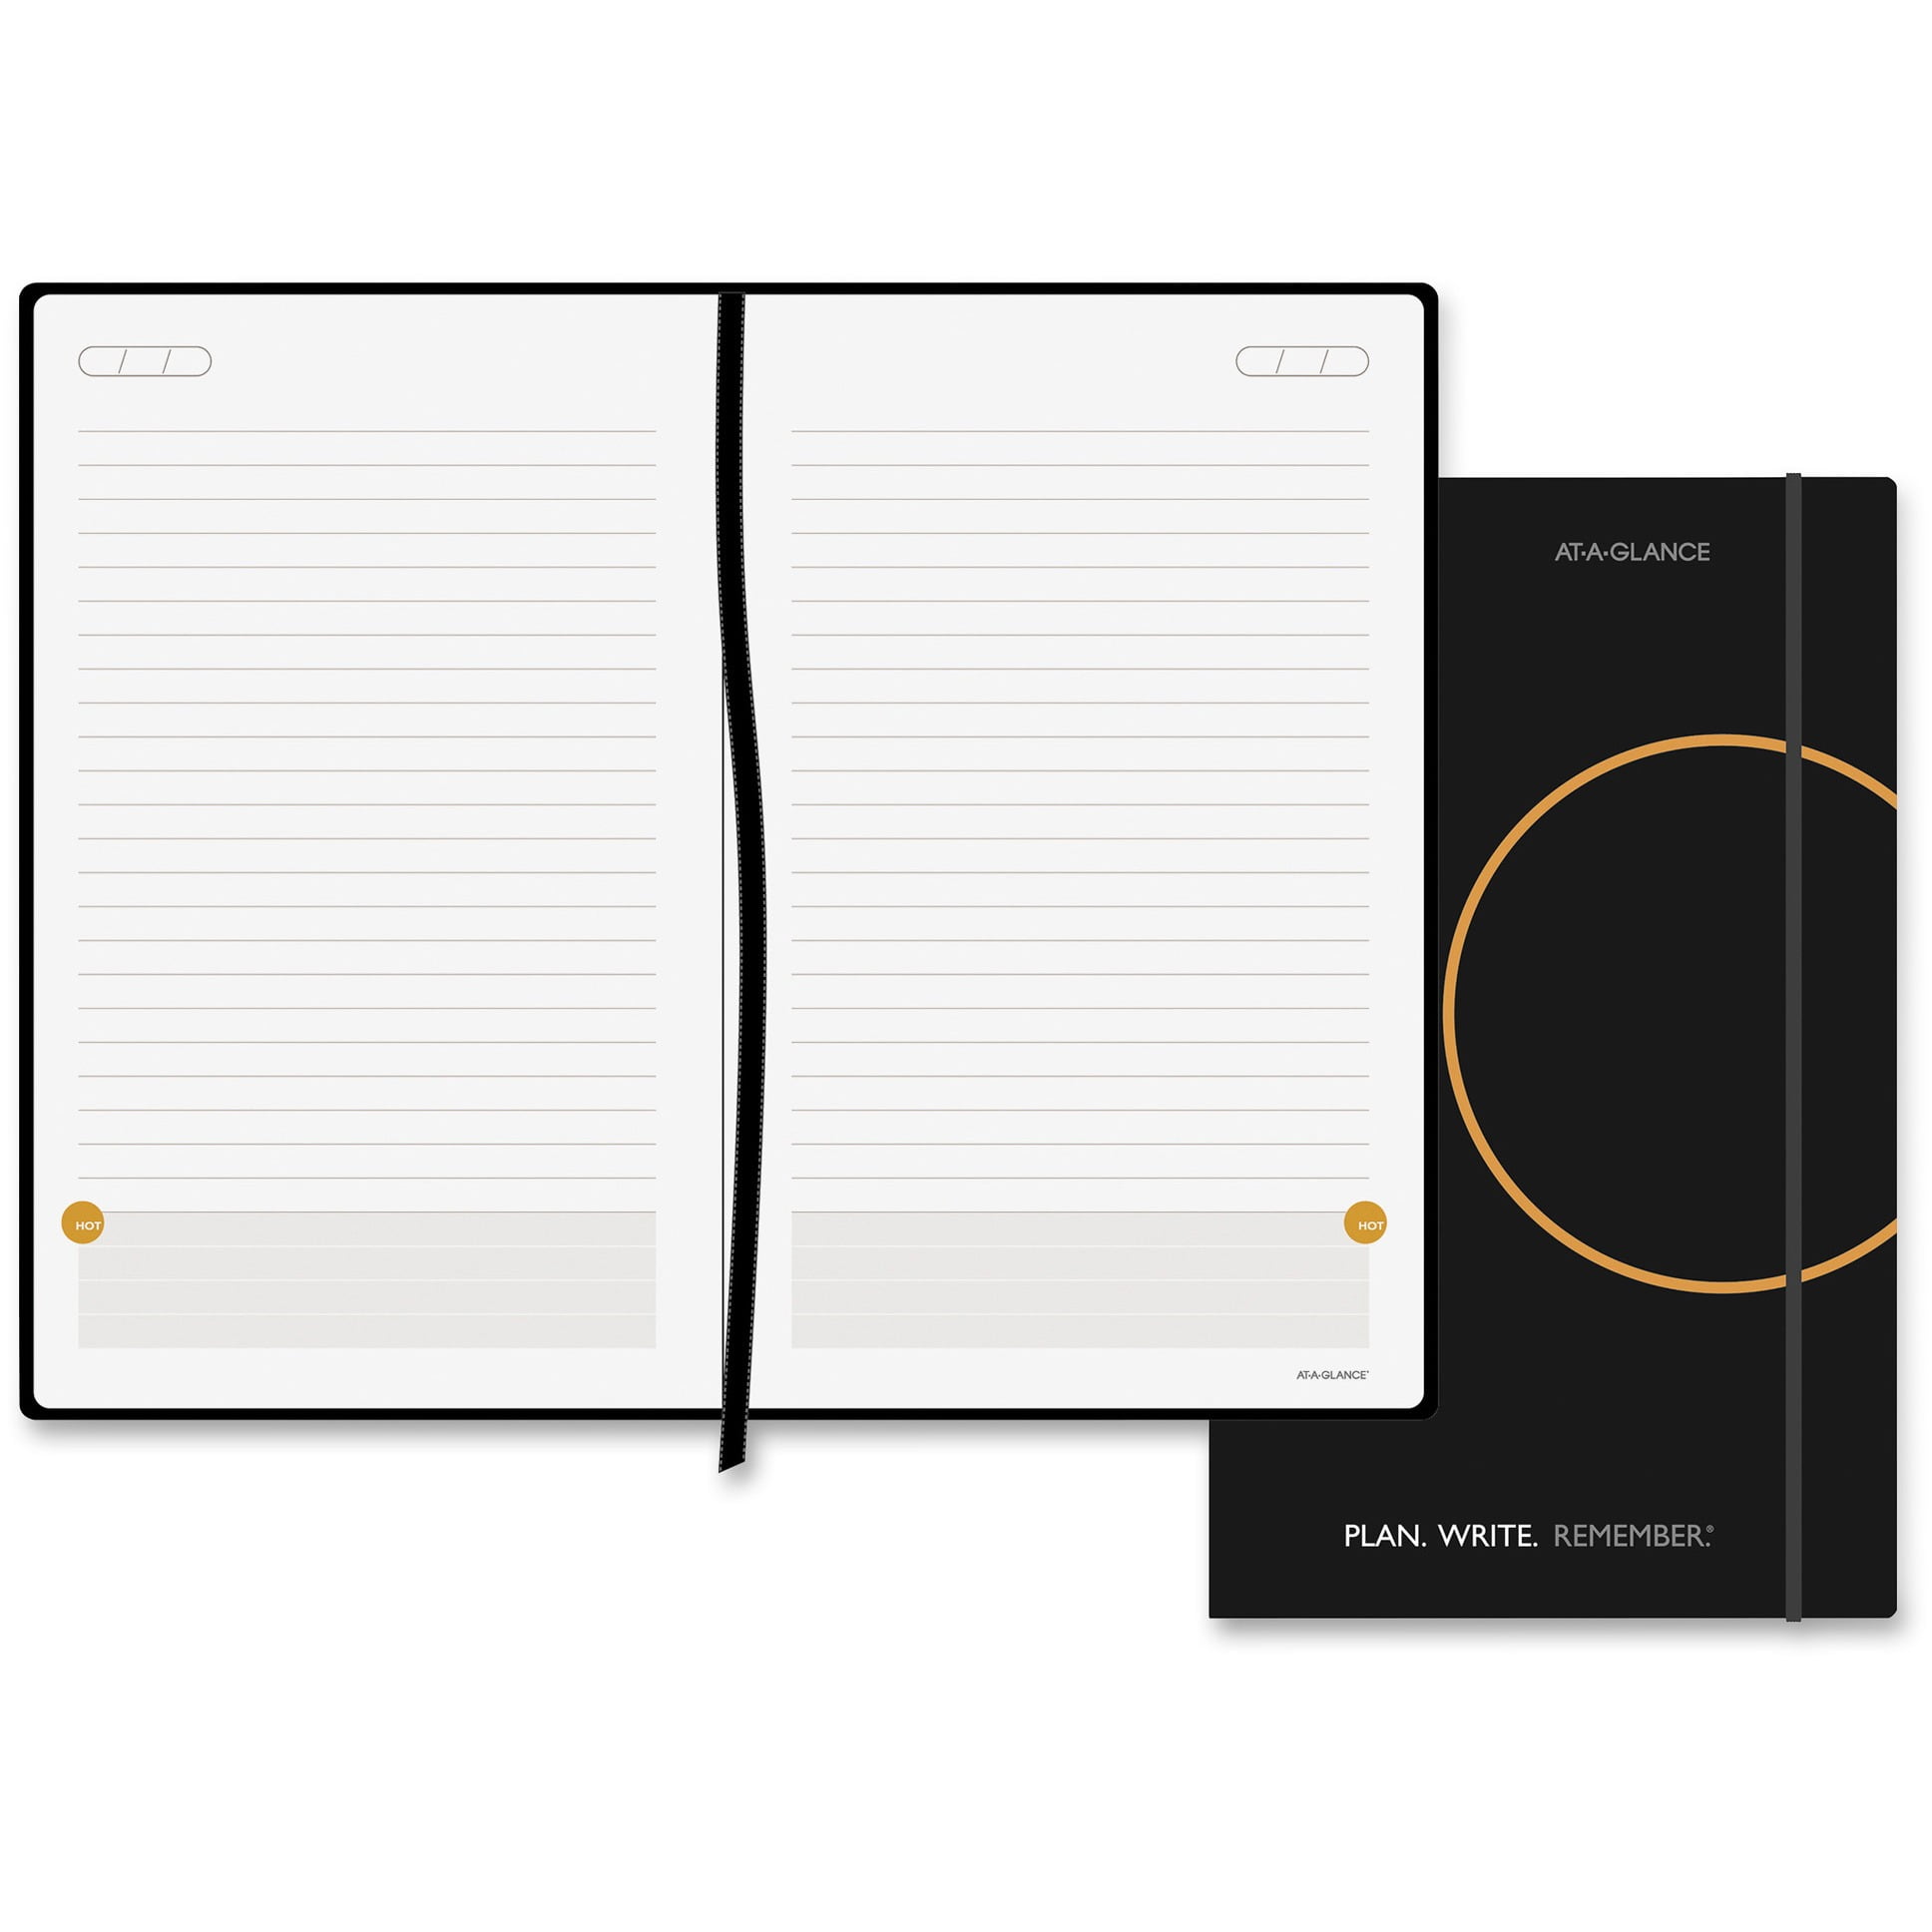 New 80-6203-05 Planning Notebook  Black Details about   AT-A-GLANCE PLAN.WRITE.REMEMBER 